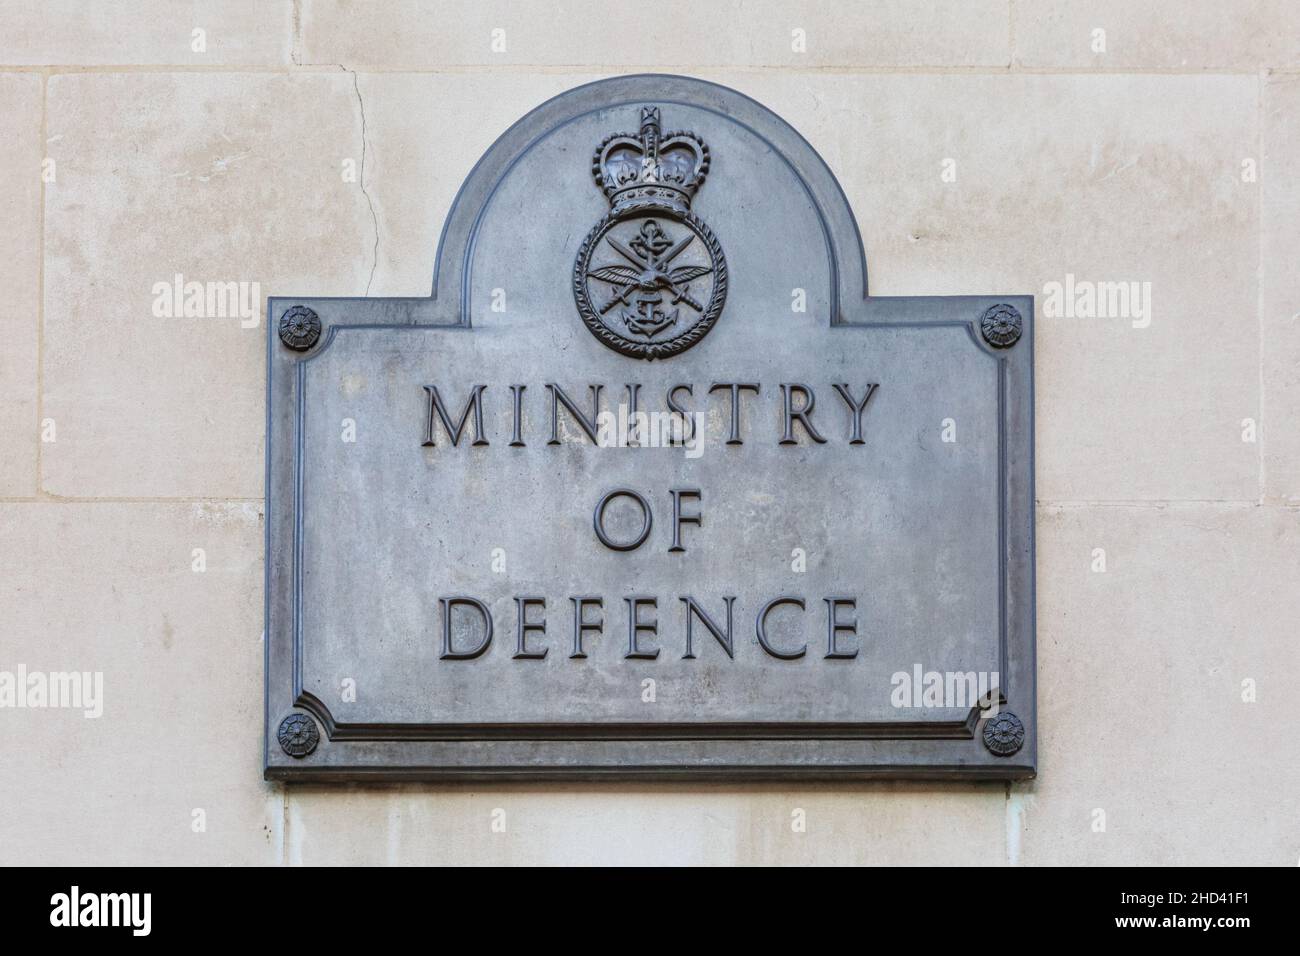 The Ministry of Defence, MoD sign on building building, Westminster, London, England Stock Photo